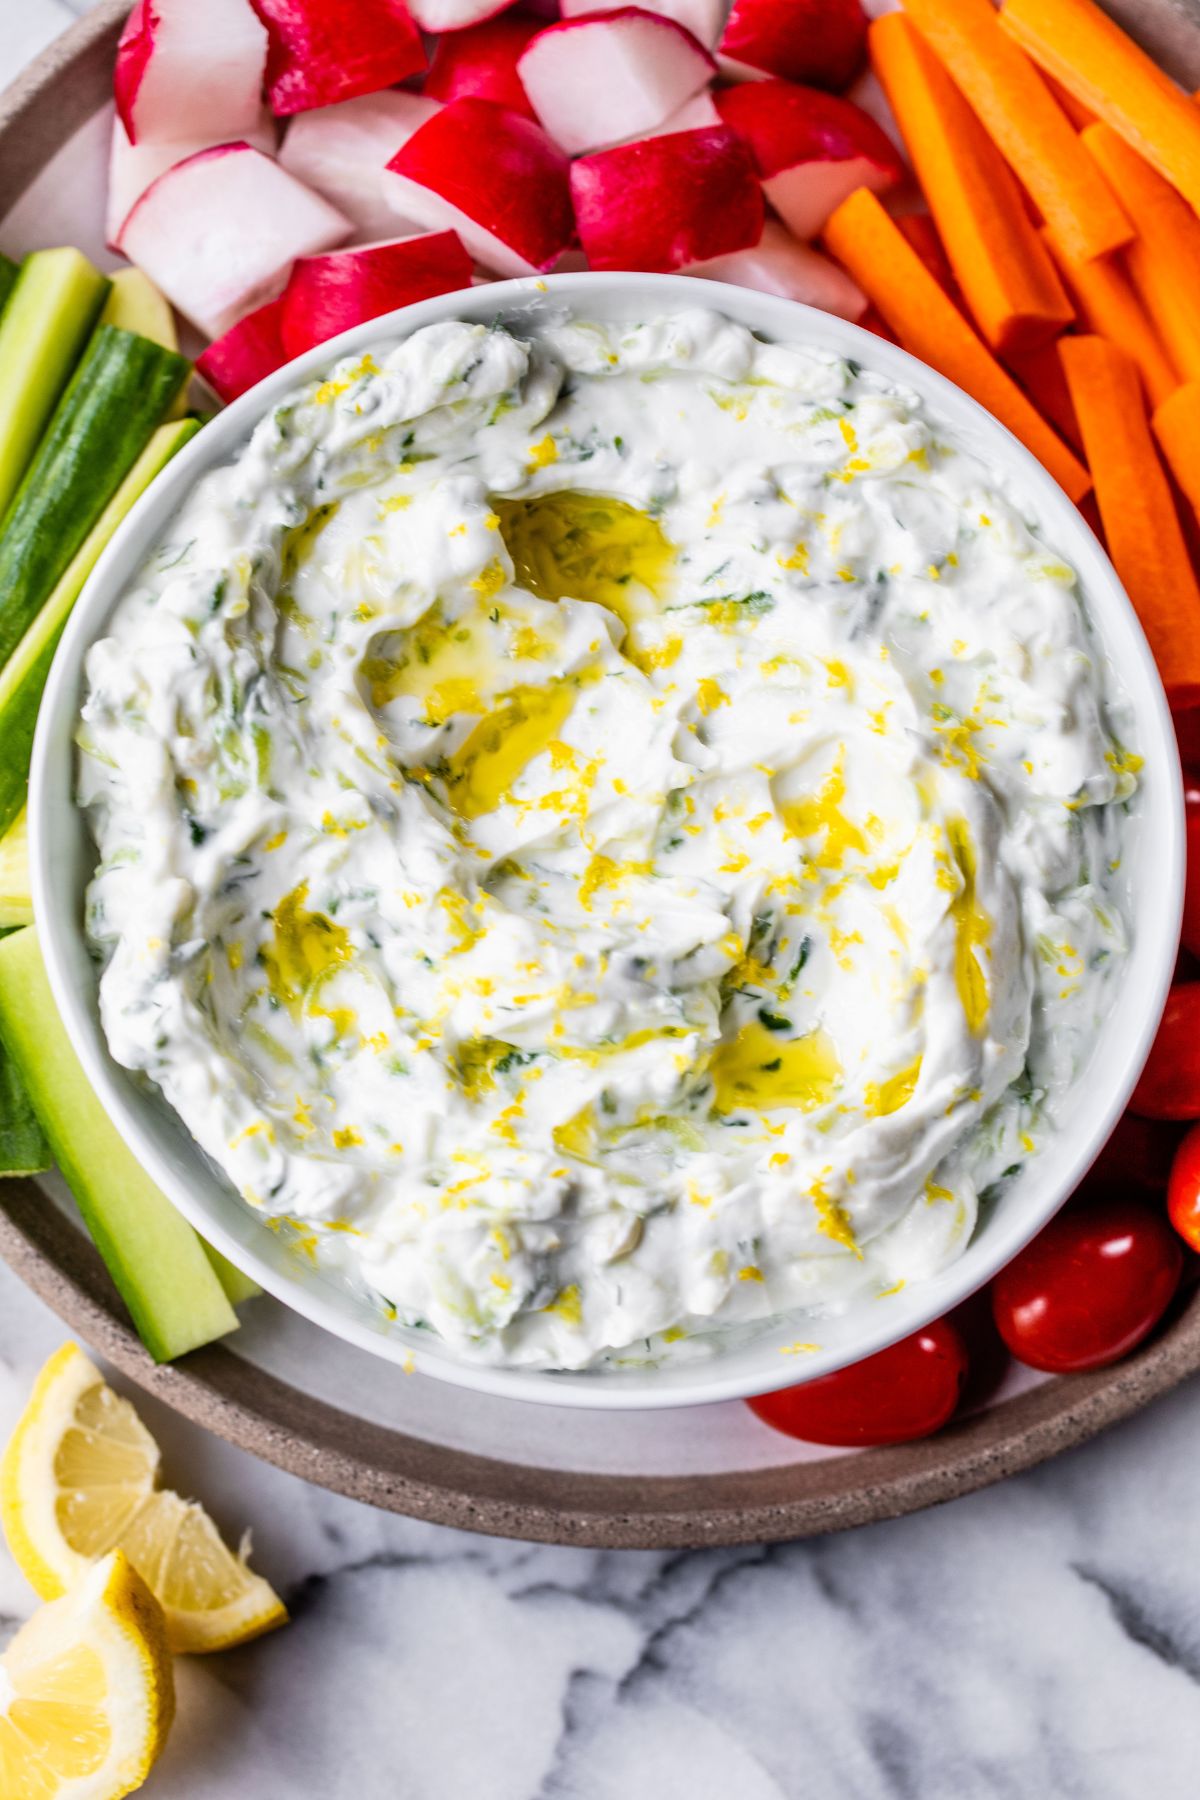 Tzatziki sauce garnished with olive oil and served with vegetables.